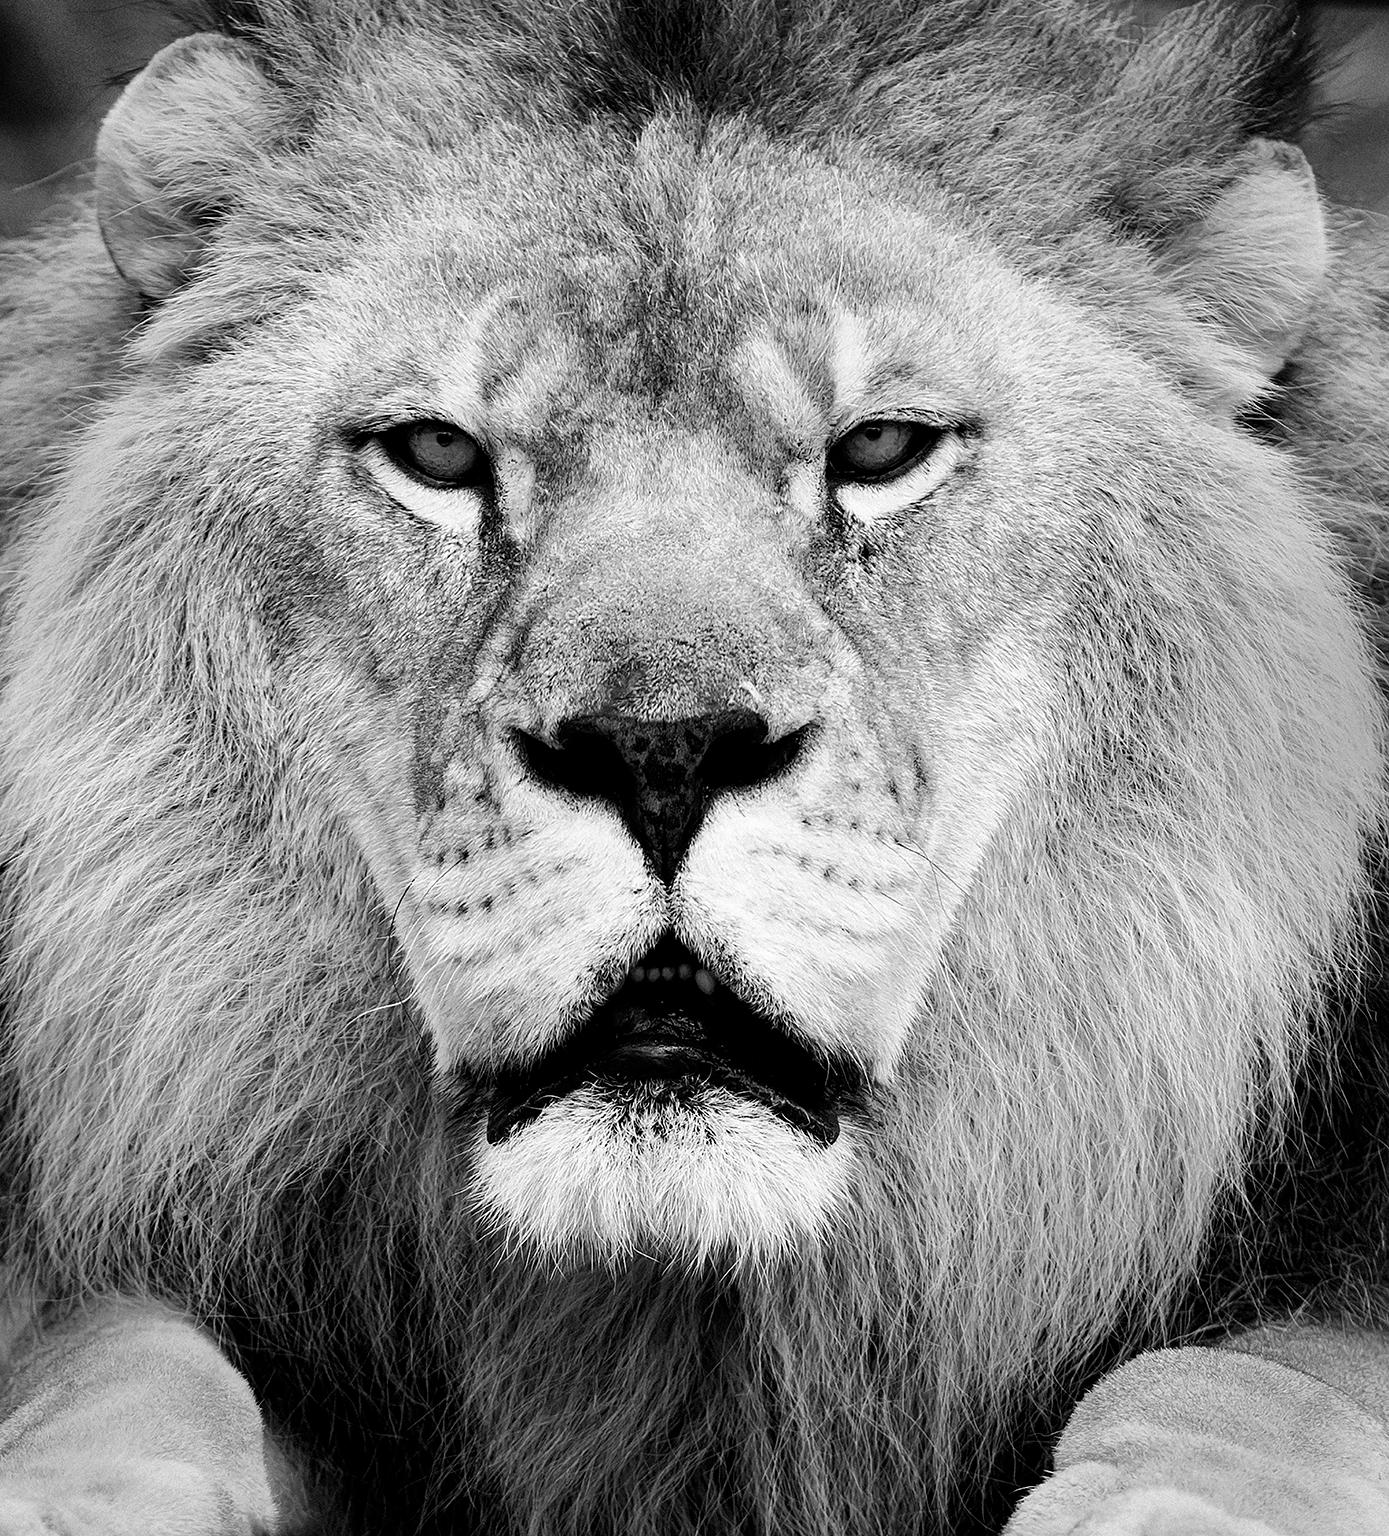 Shane Russeck Animal Print - "Face Off" 24x36  - Black & White Photography, Lion Photograph Africa Fine Art